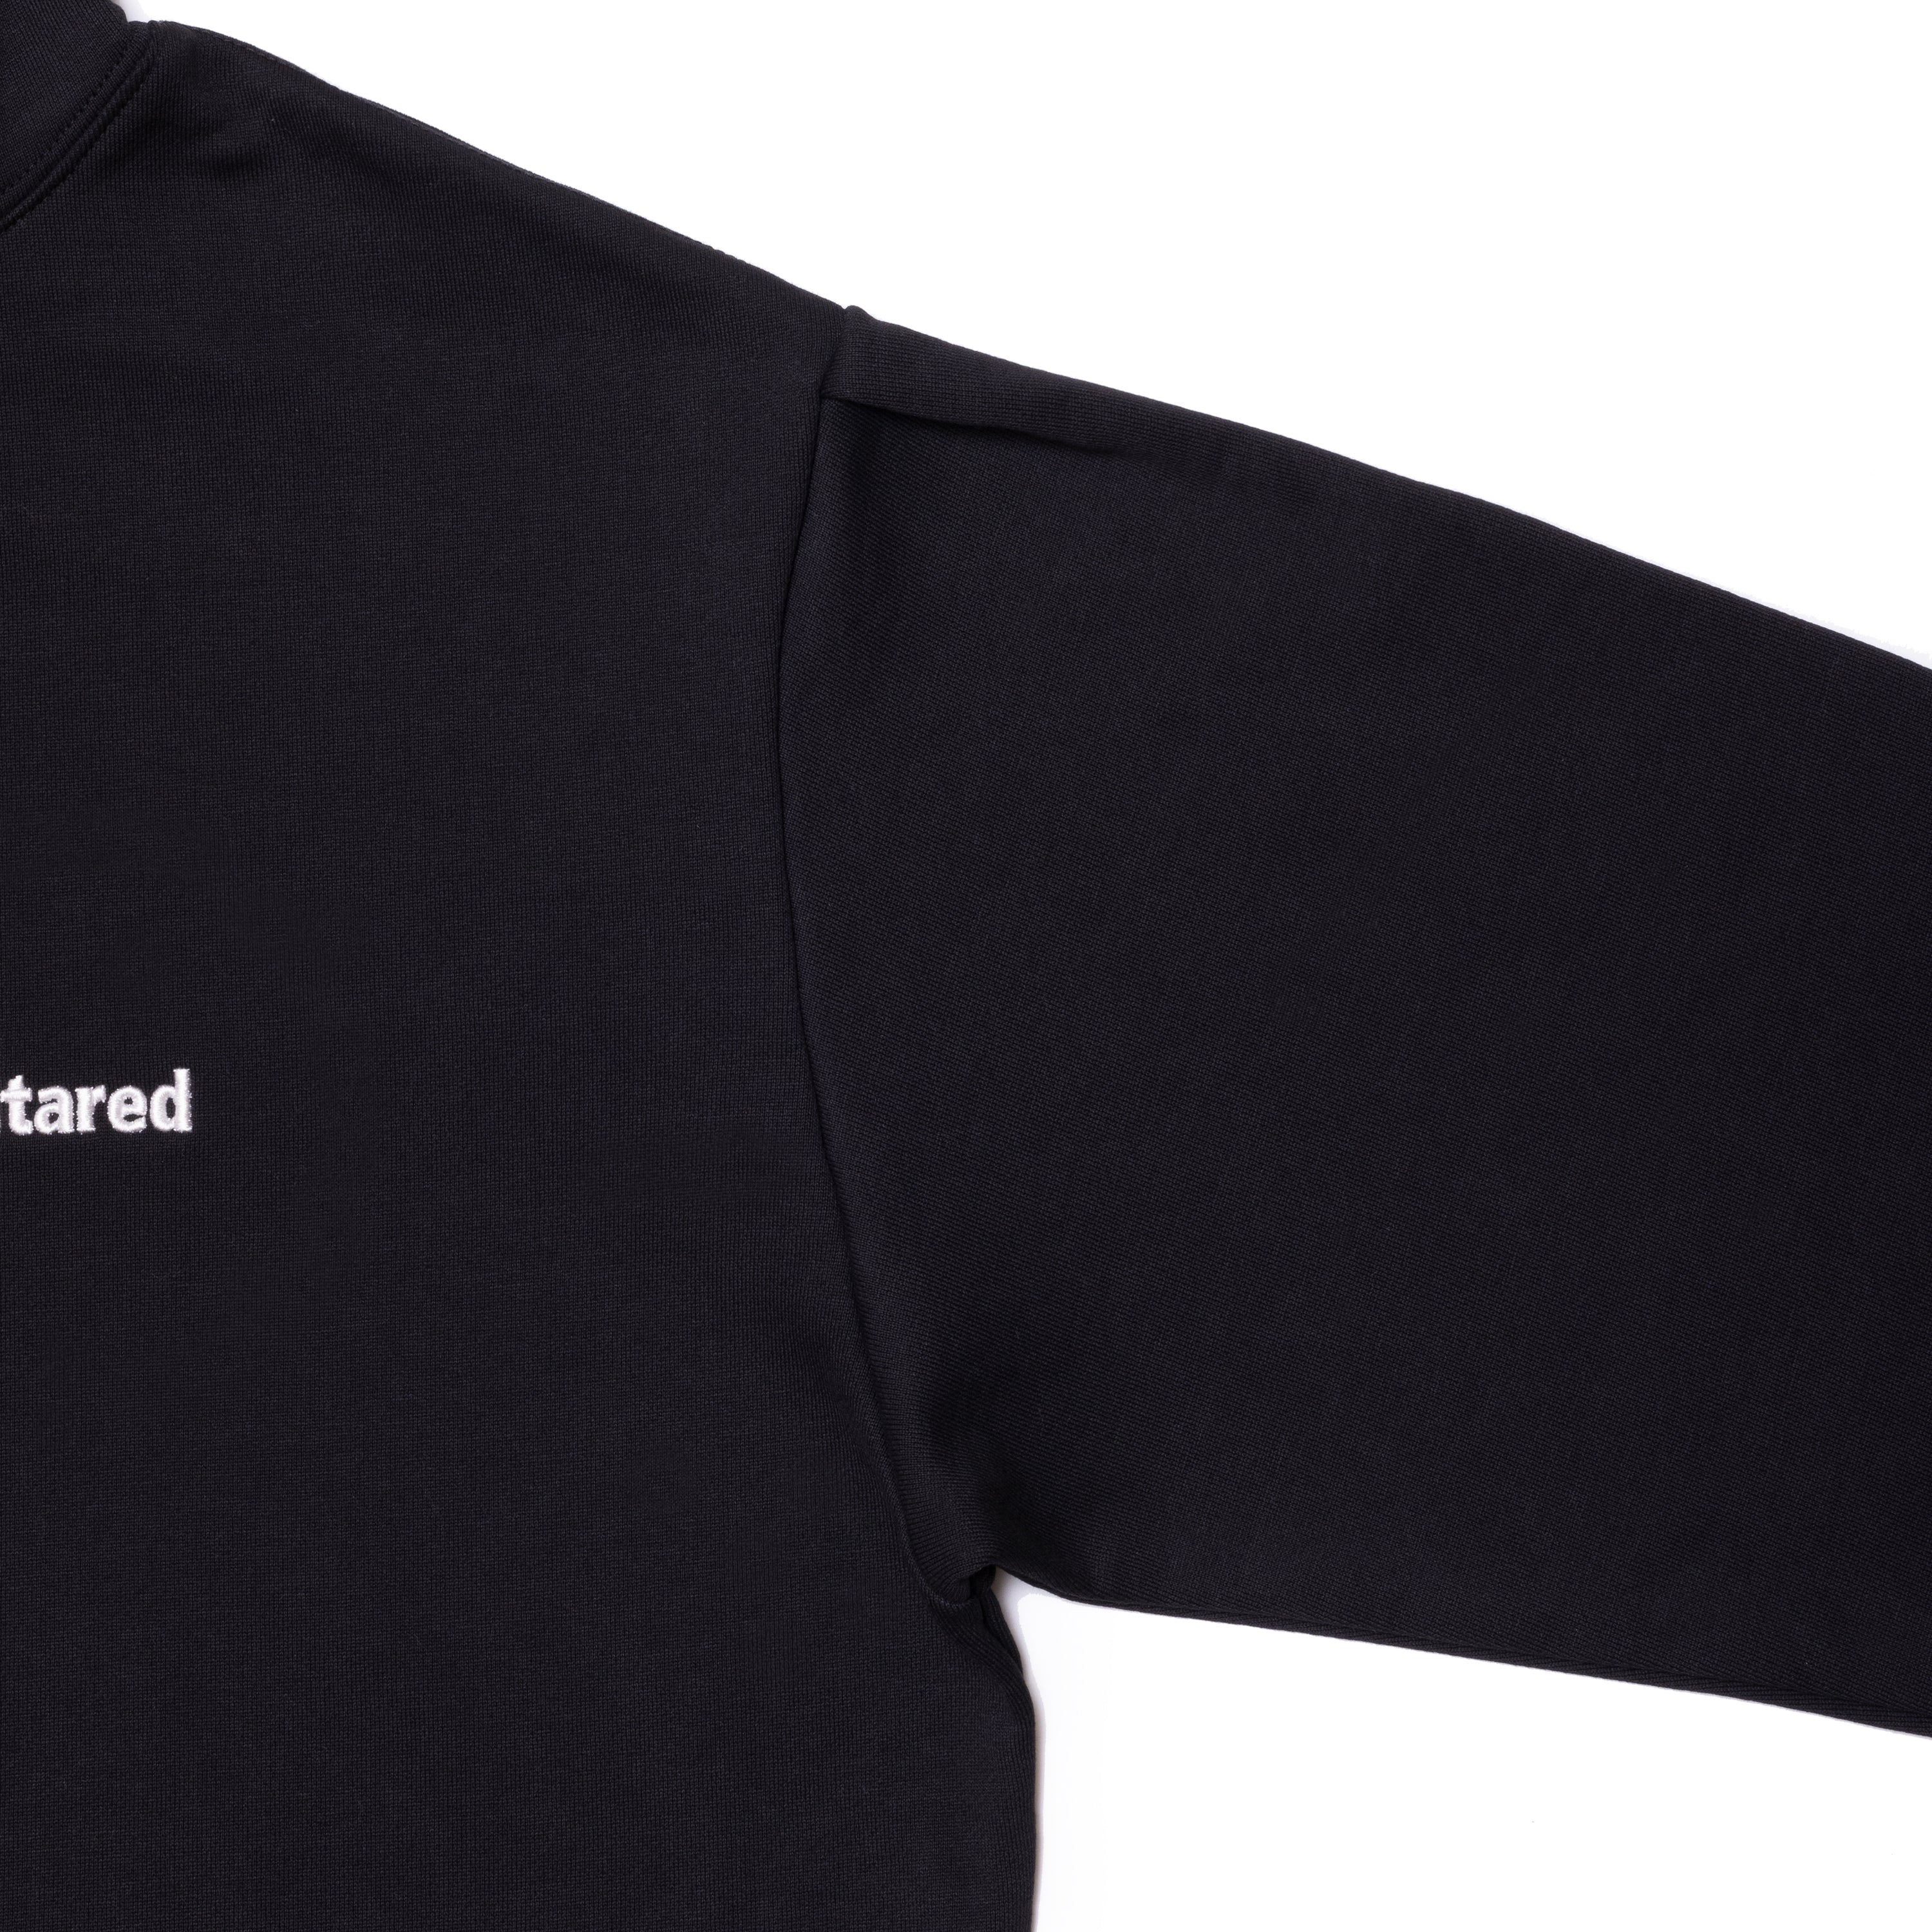 altared/Logo 3D Embroidery Hooded Sweat Shirt[BLACK]